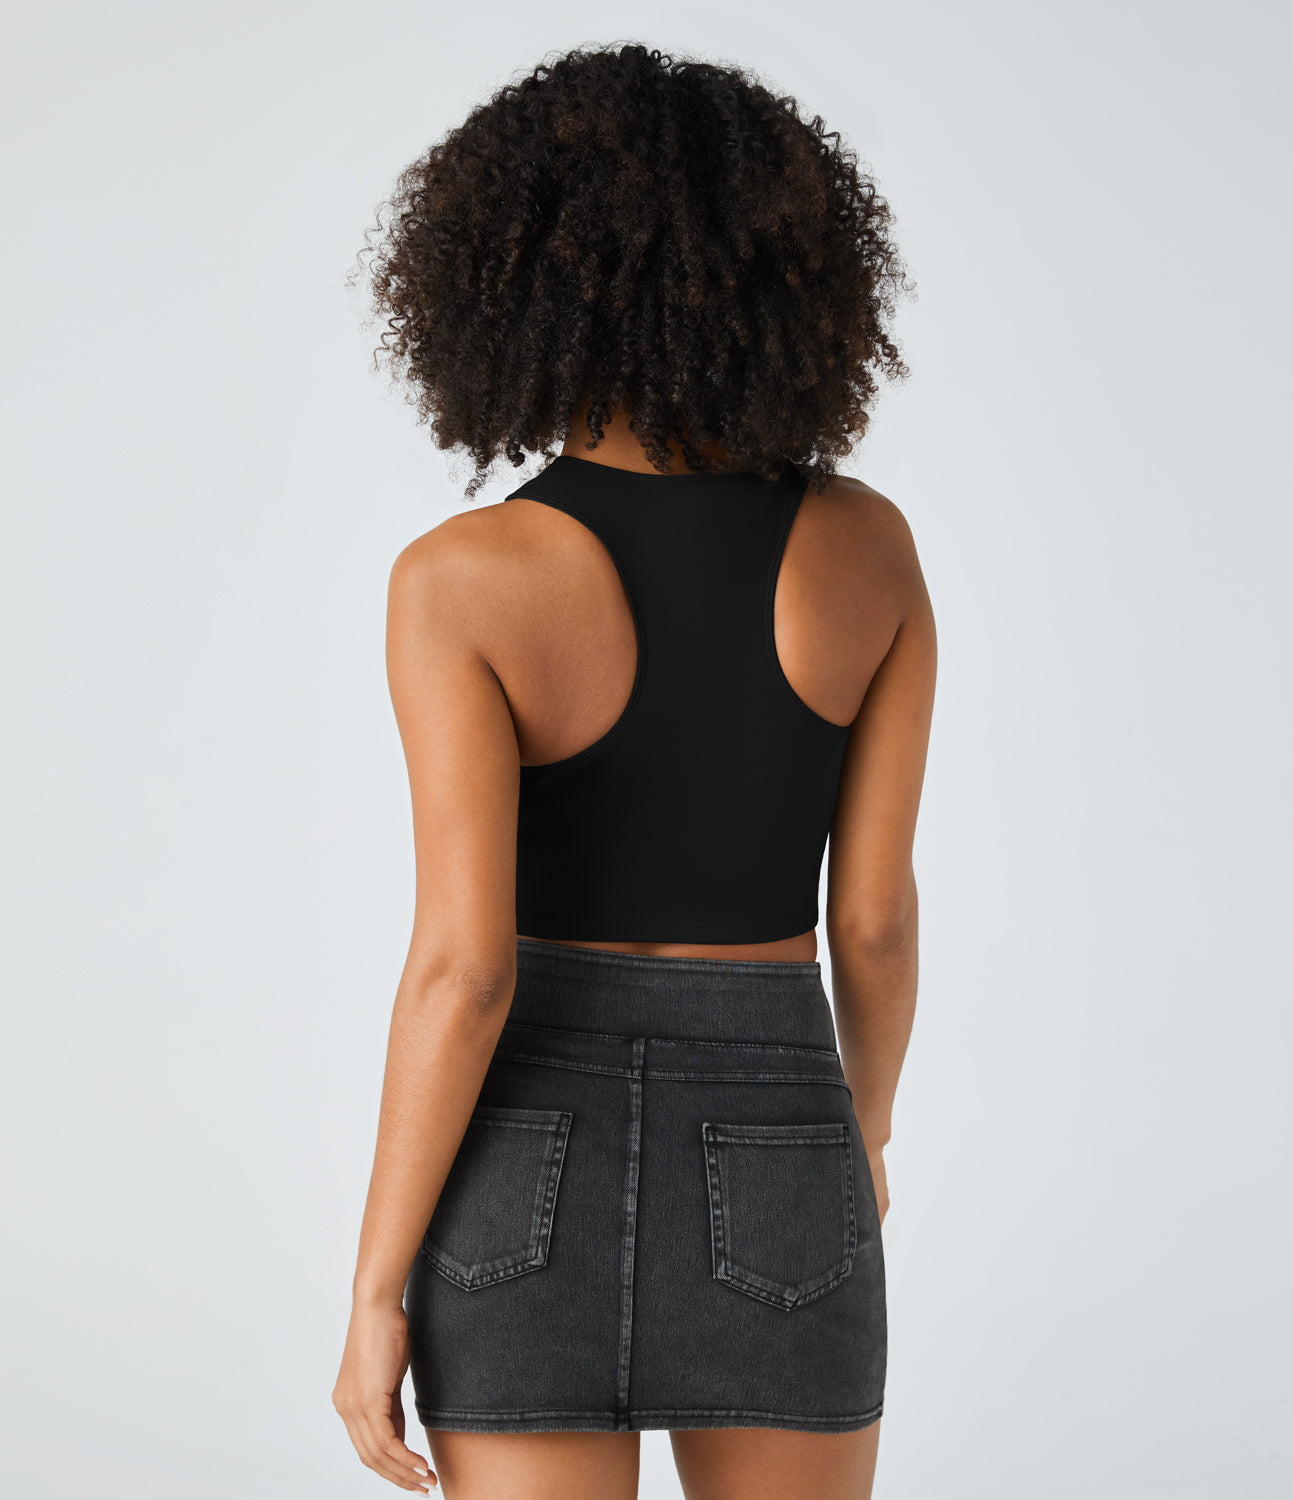 

Halara Backless Racerback Cut Out Ripped Cropped Casual Tank Top Tank Top - Black -  golf tops halter top tunic tops sleeveless tops